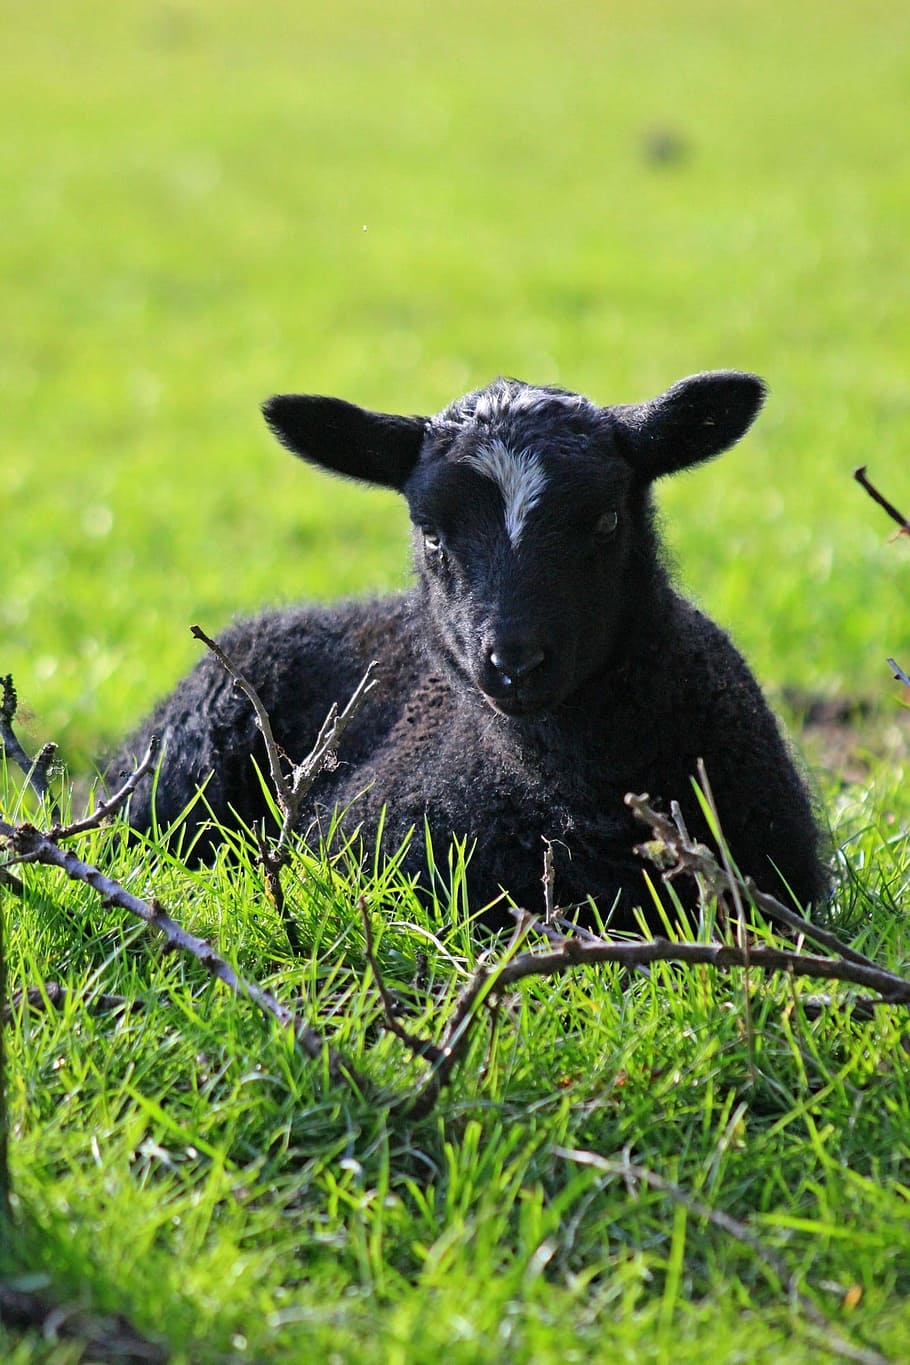 Spring, Lambs, Sheep, black fur, white forhead, spot, grass, laying down, one animal, black color